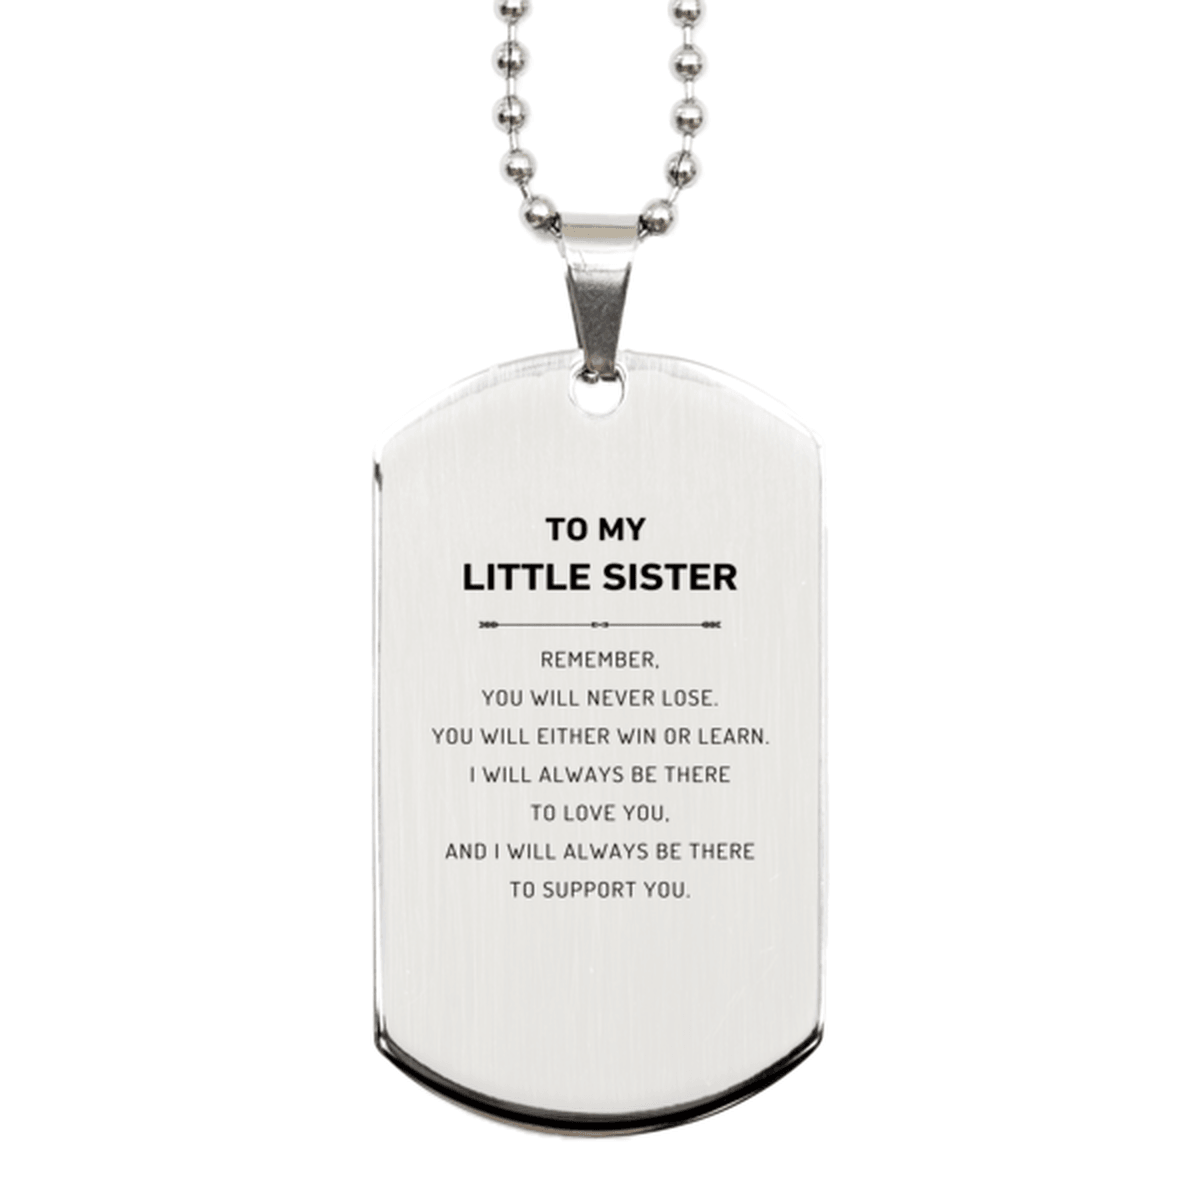 Little Sister Gifts, To My Little Sister Remember, you will never lose. You will either WIN or LEARN, Keepsake Silver Dog Tag For Little Sister Engraved, Birthday Christmas Gifts Ideas For Little Sister X-mas Gifts